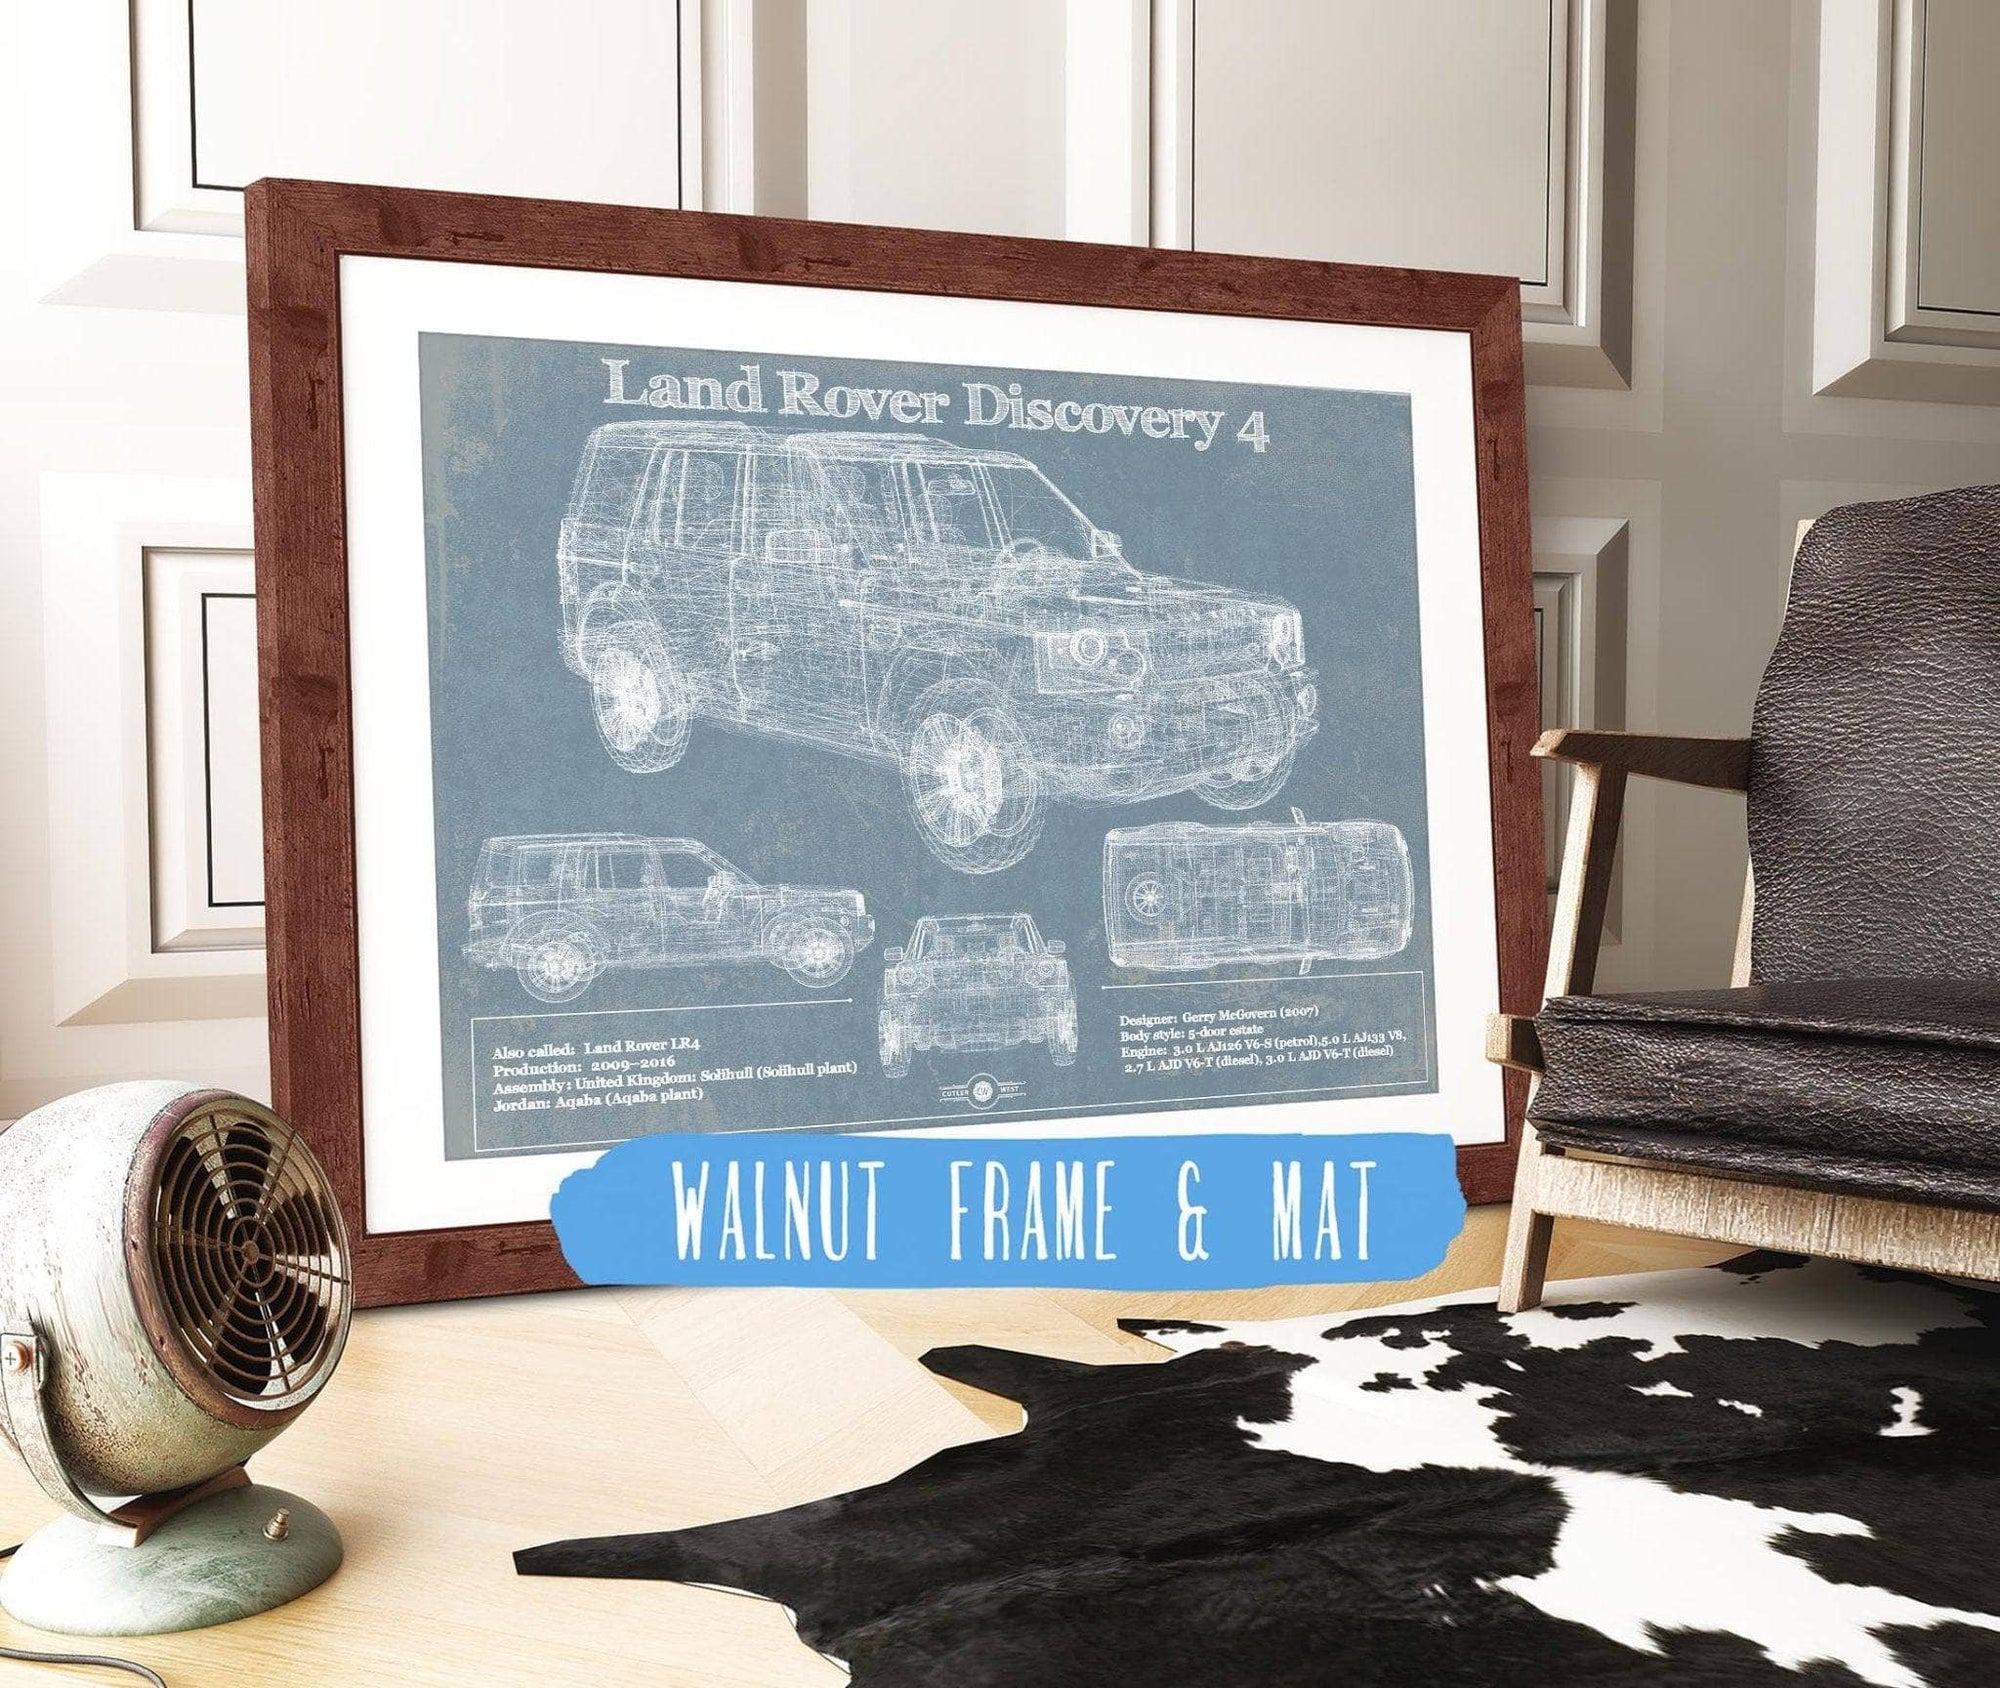 Cutler West Land Rover Collection 14" x 11" / Walnut Frame & Mat Land Rover Discovery 4 Blueprint Vintage Auto Patent Print 906705570